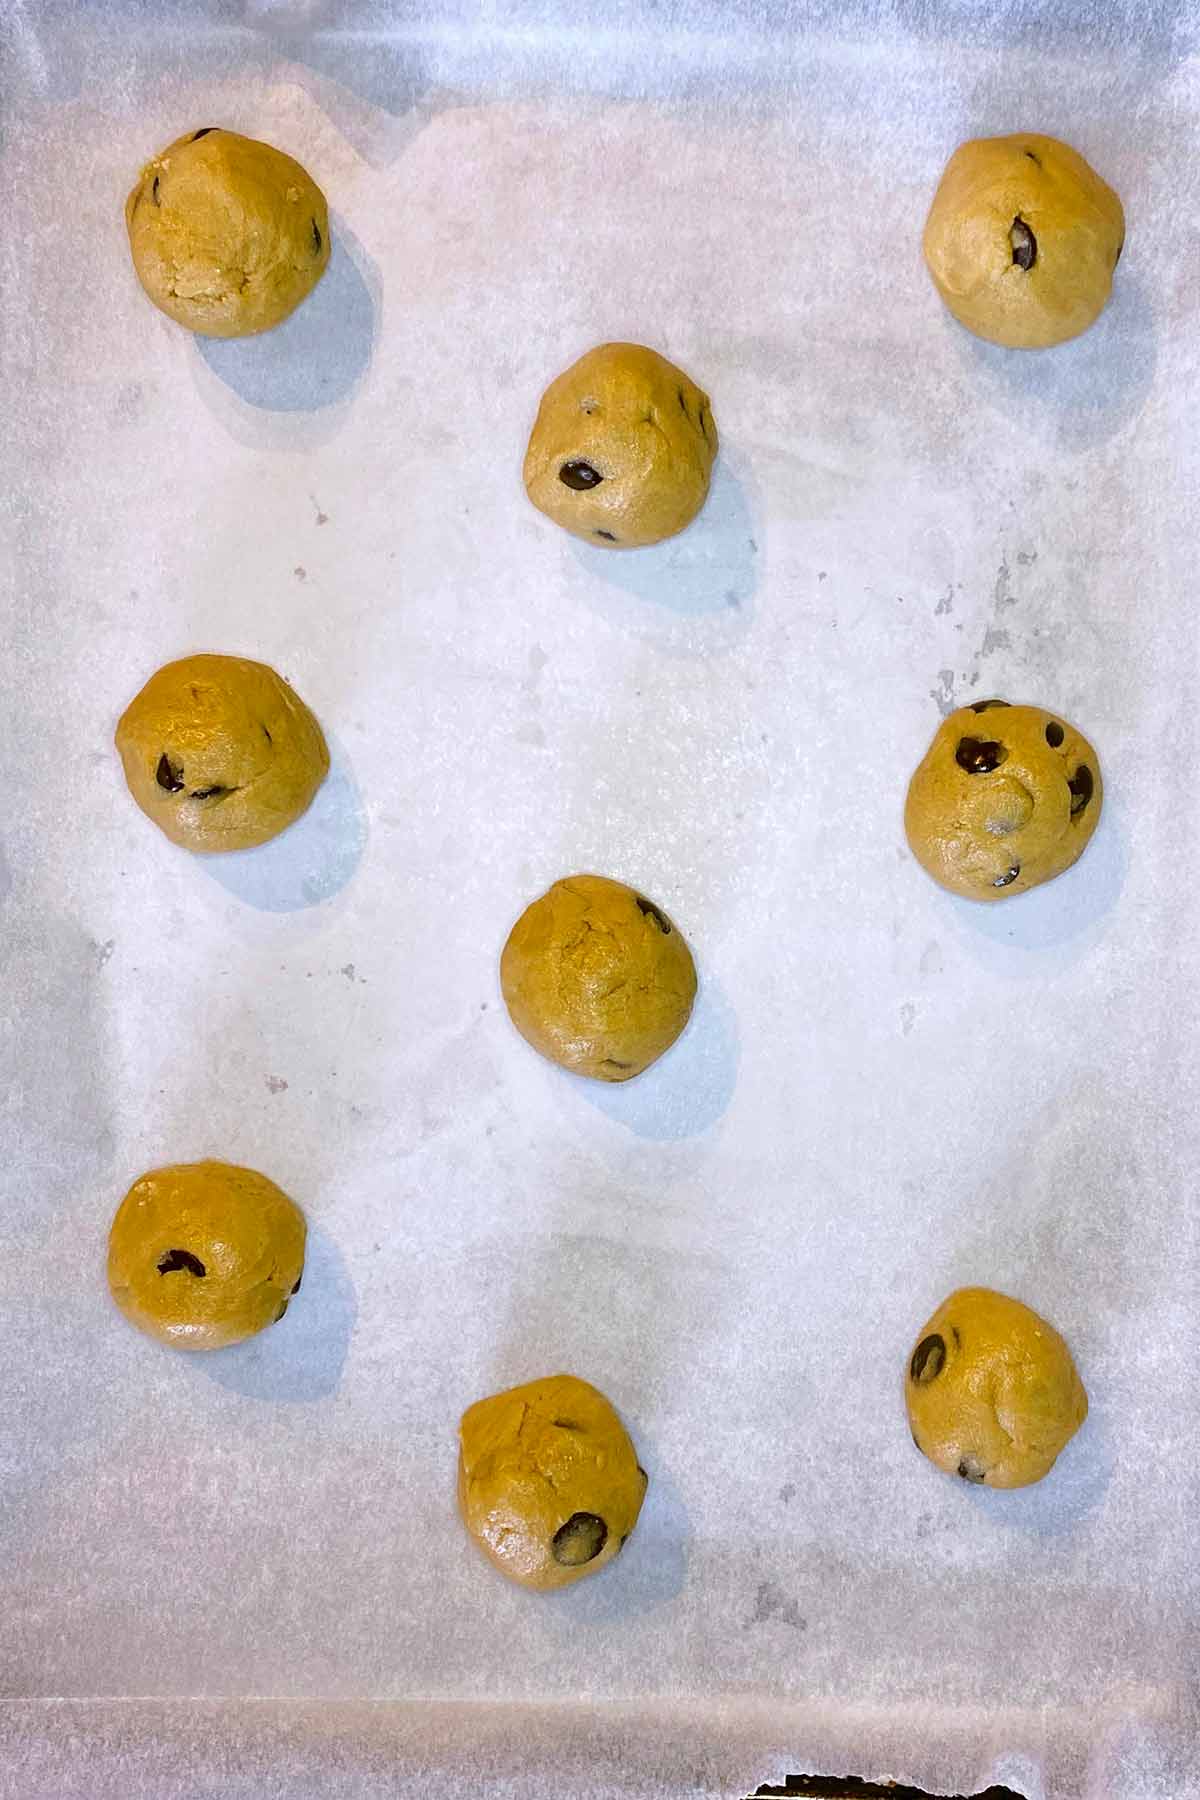 Nine balls of cookie dough on a lined baking sheet.